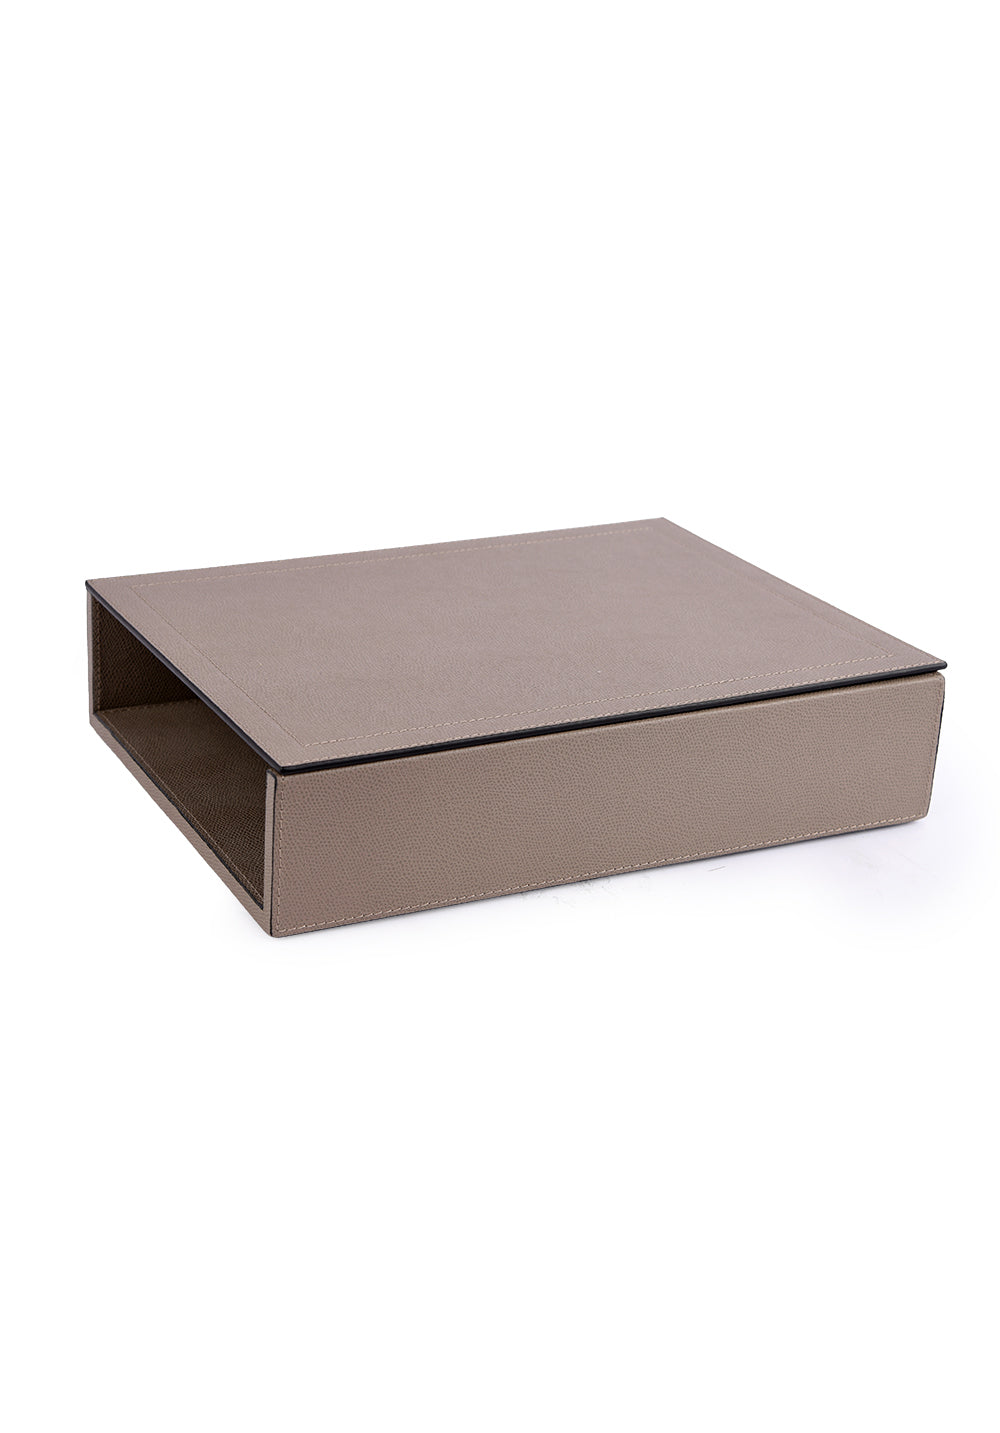 STACKABLE A4 PAPER TRAY WITH LID G21ST21